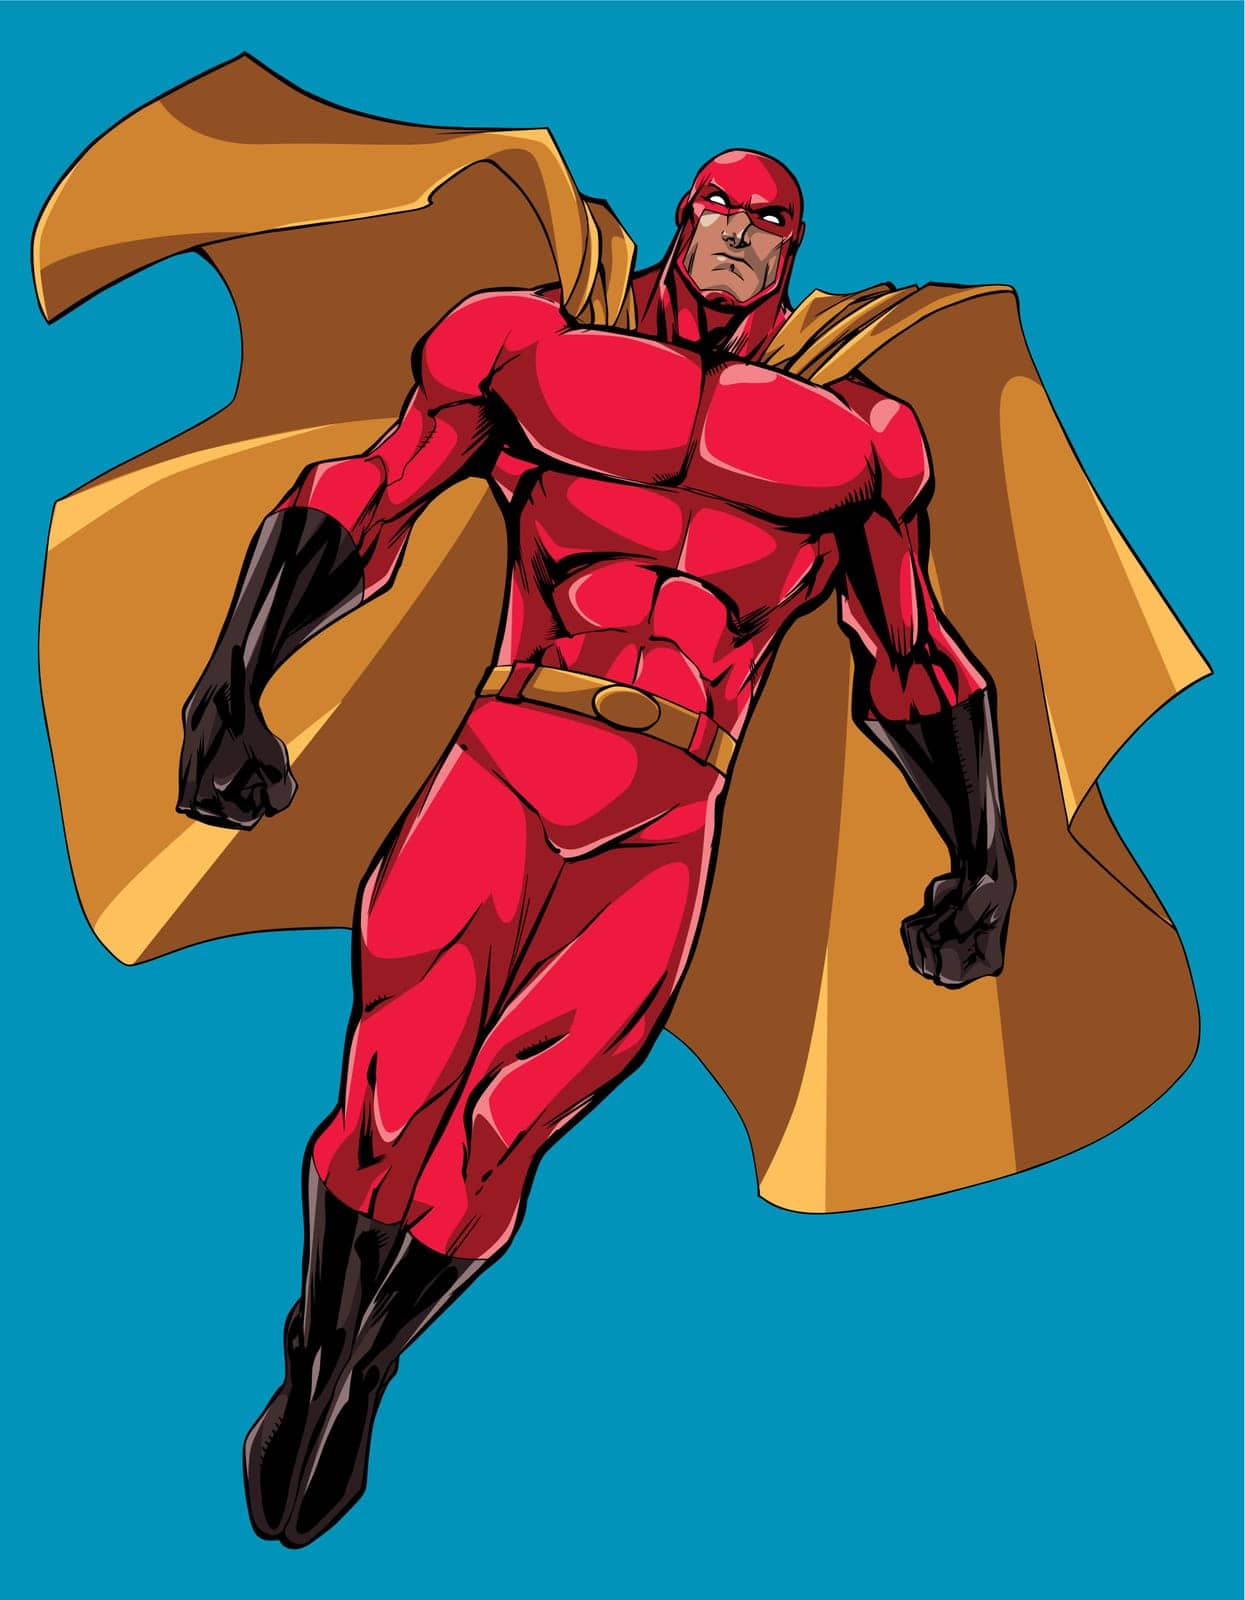 Full length illustration of powerful superhero looking down while soaring in the sky.